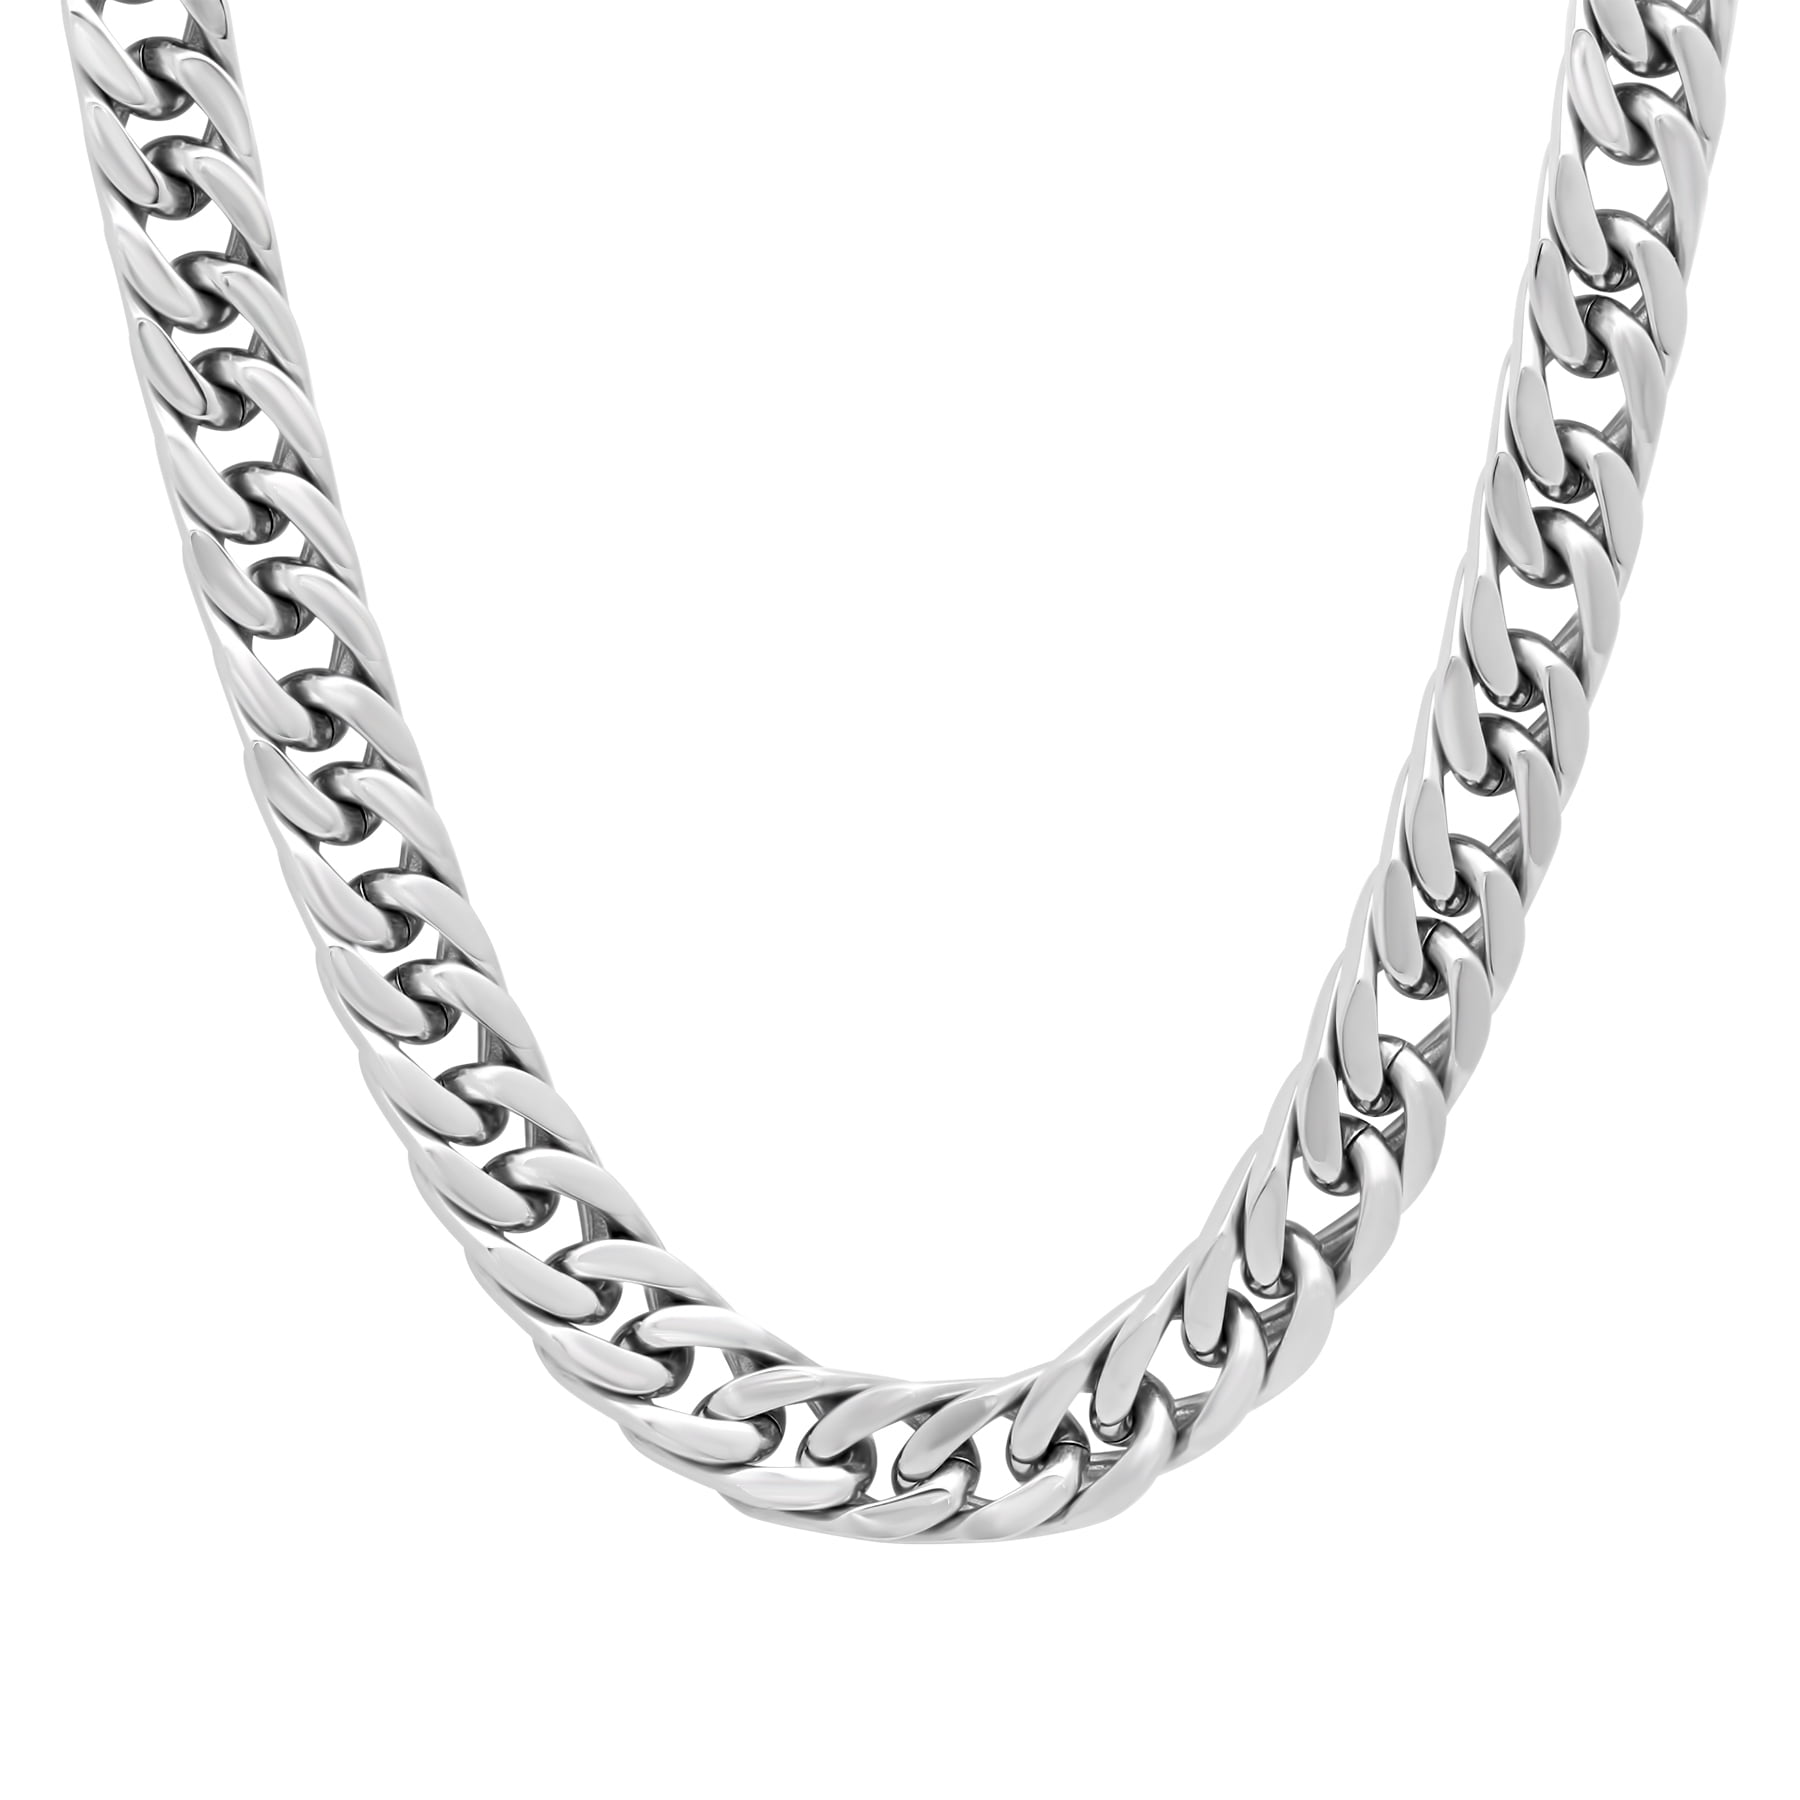 Details about   MENDINO 8mm Men's Stainless Steel Necklace Franco Curb Cuban Link Chain 24 inch 